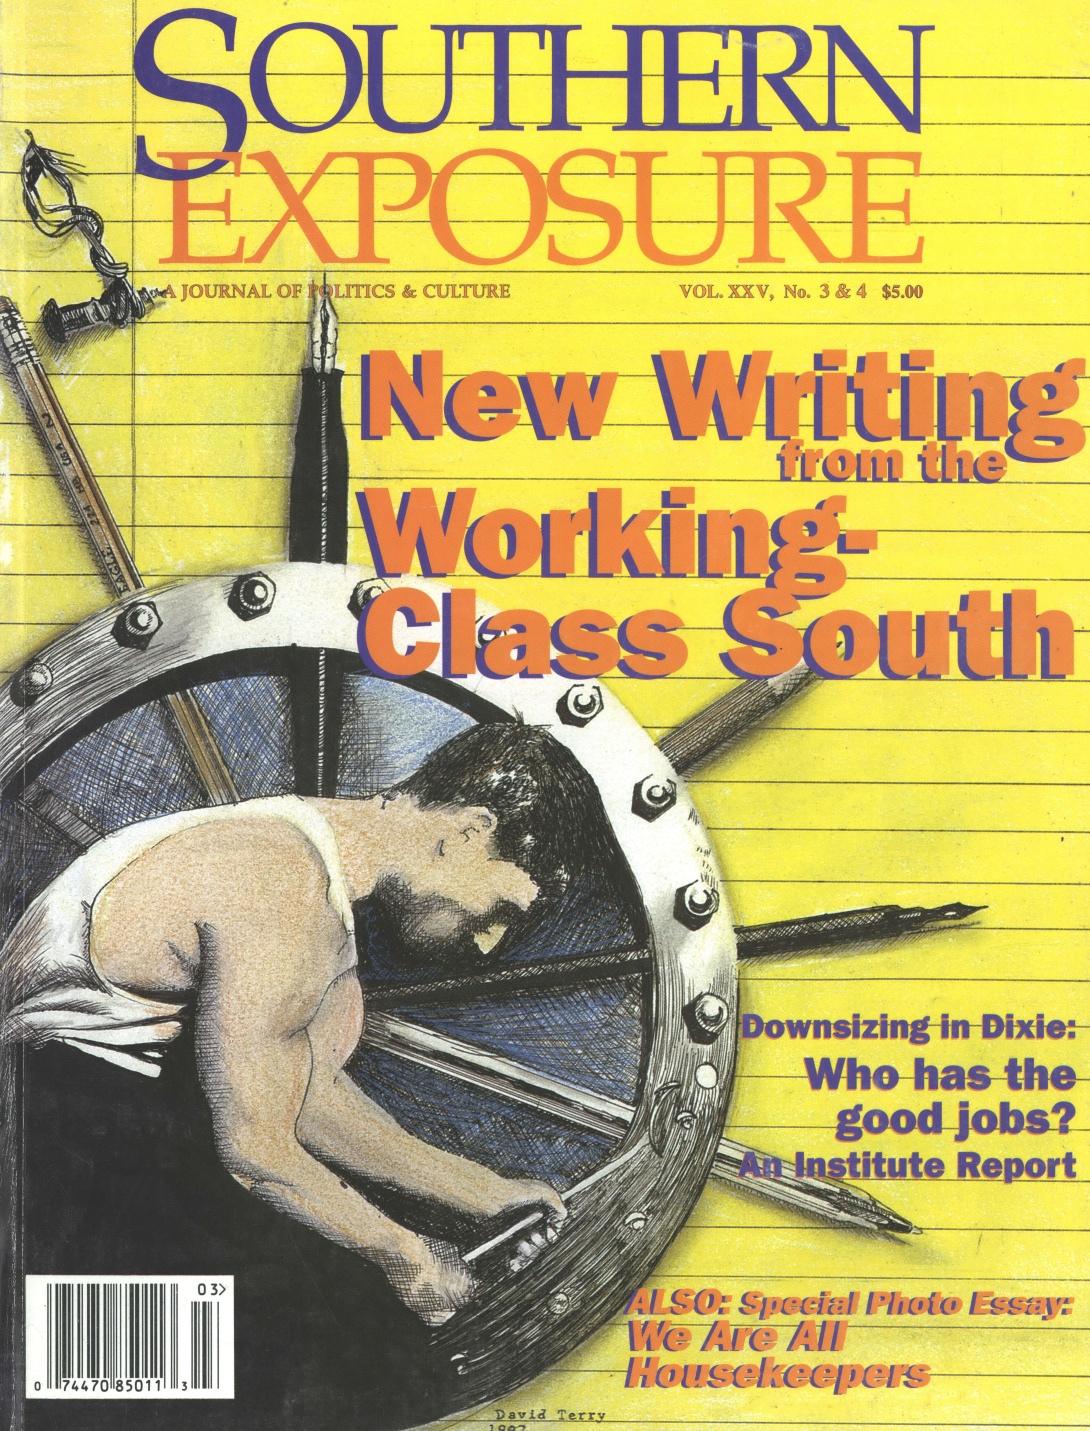 Magazine cover with background of notebook paper and visual of man working on metal wheel. Text reads "New Writing from the Working-Class South"